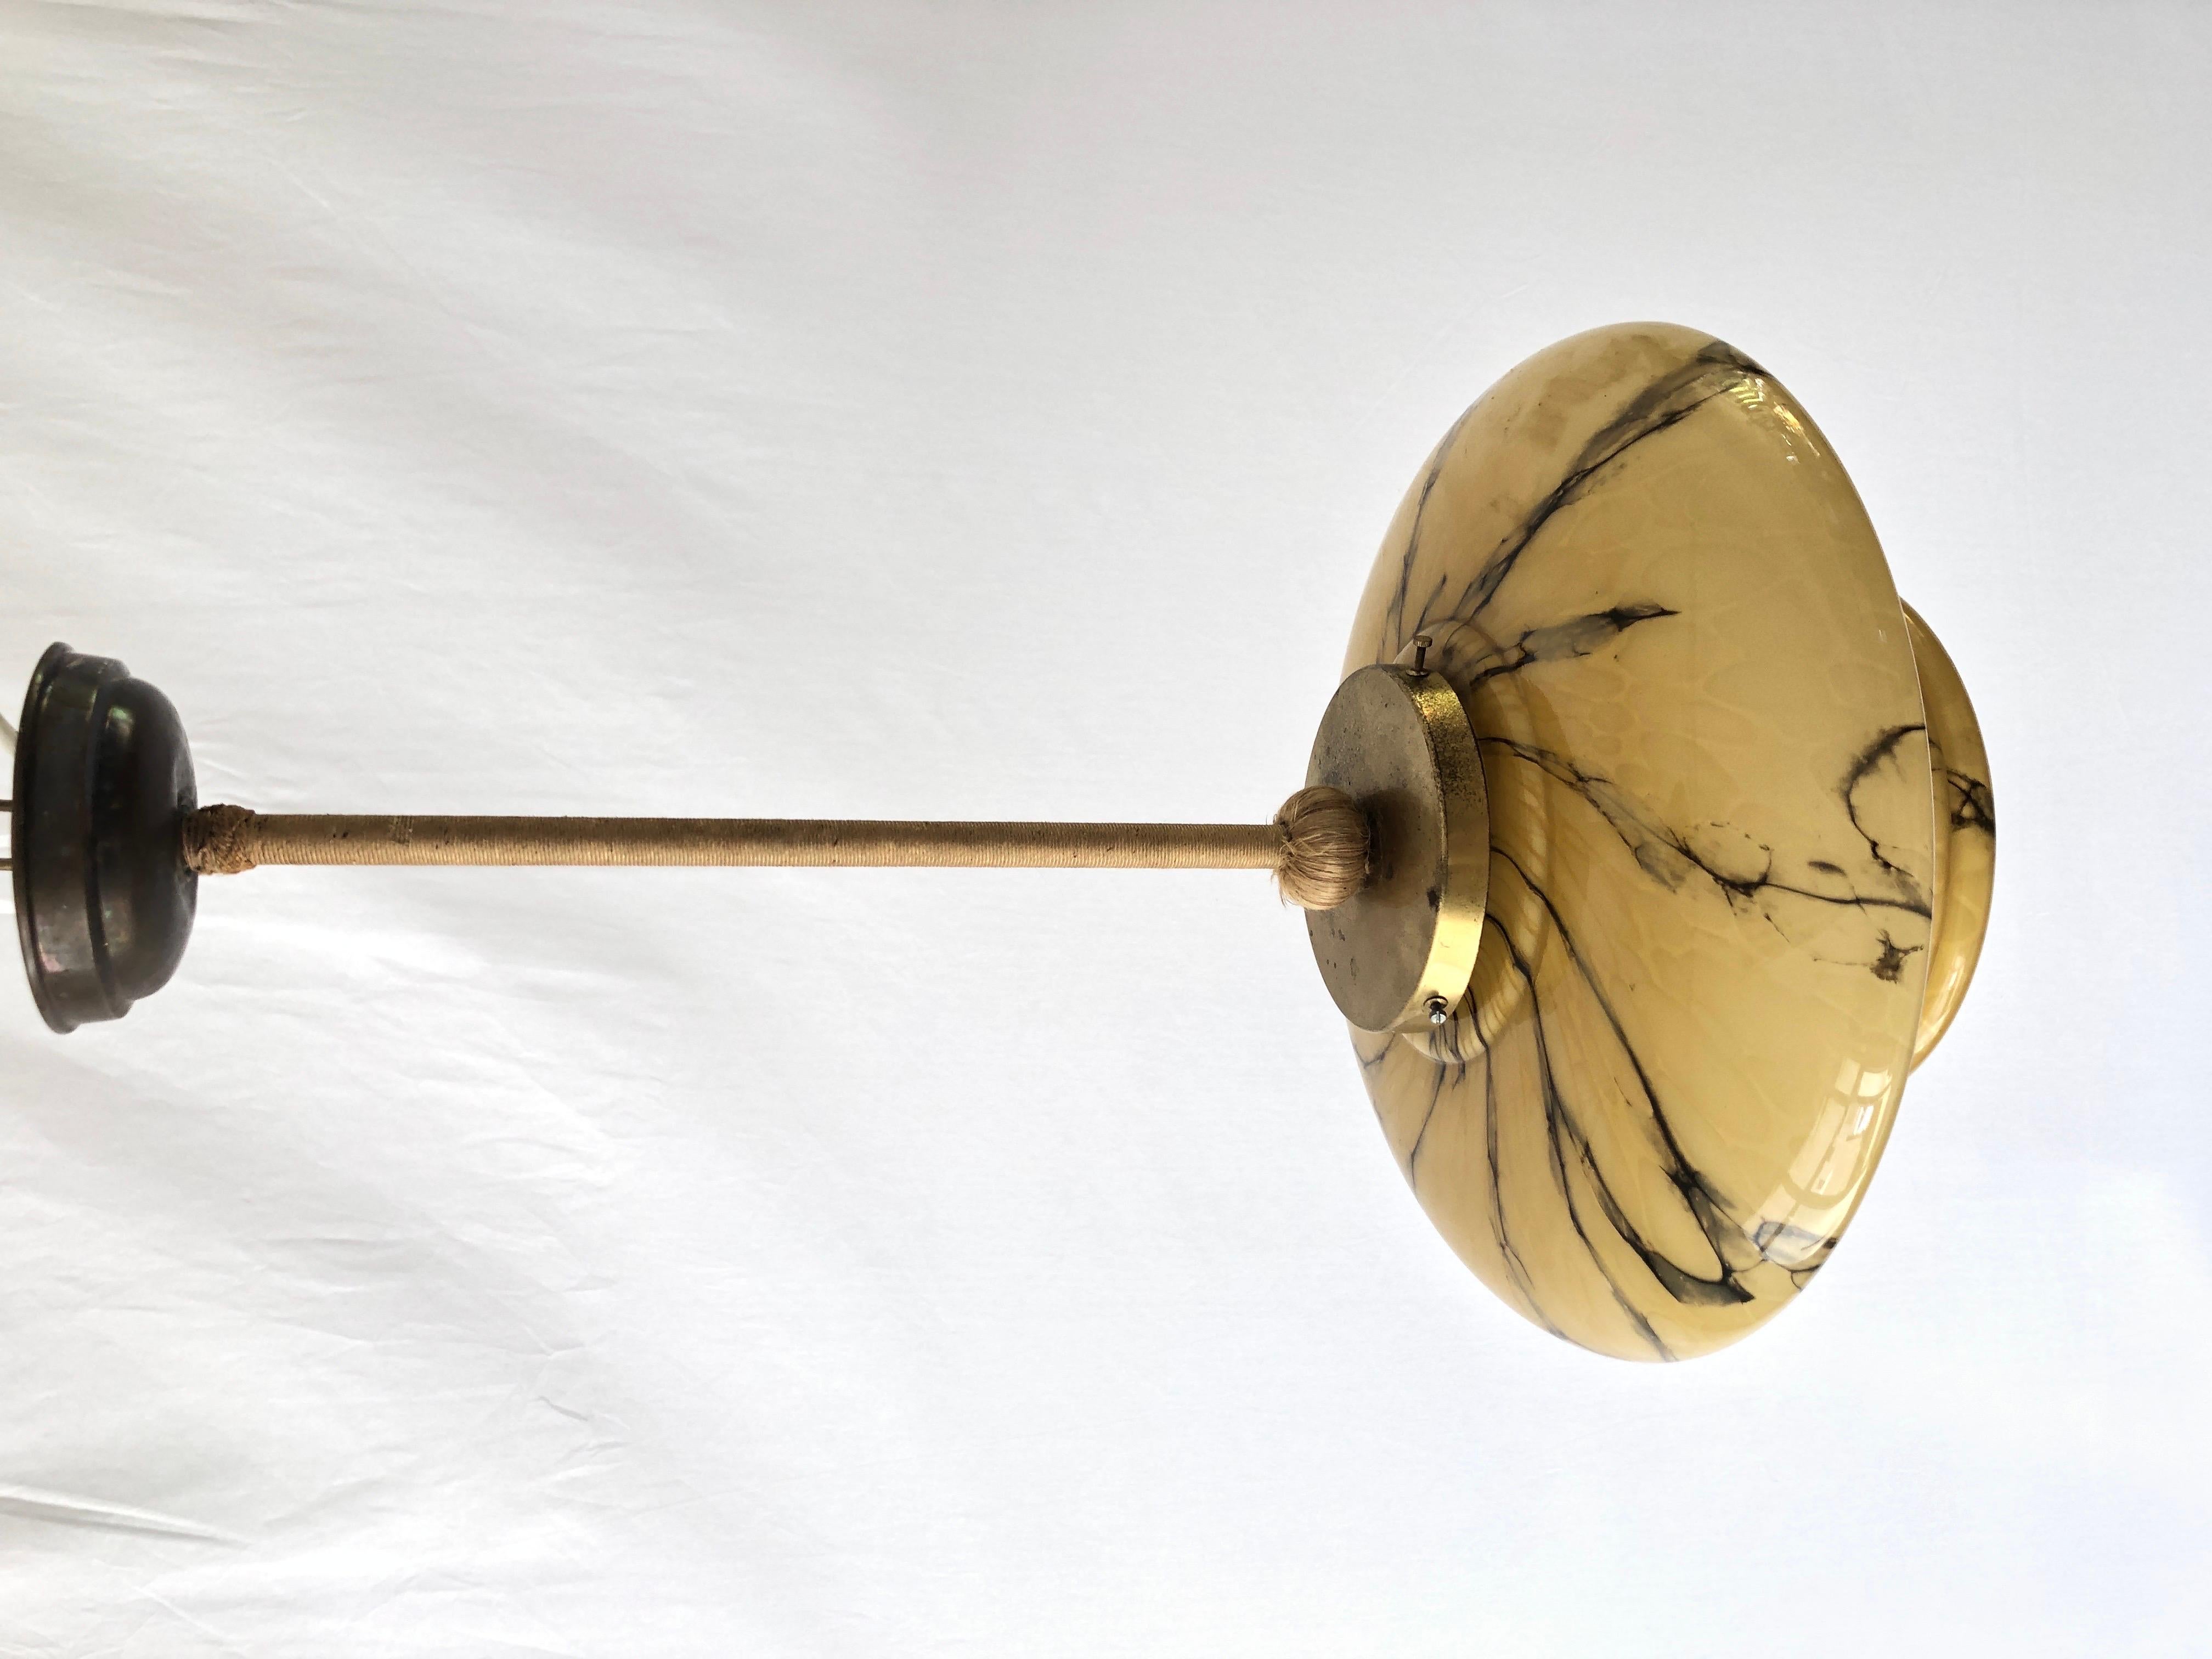 Brown Glass Art Deco Style Ceiling Lamp, 1950s, Germany

This lamp works with E27 light bulb.

Measurements: 
Height: 57 cm
Shade diameter and height: 33 cm and 17 cm


